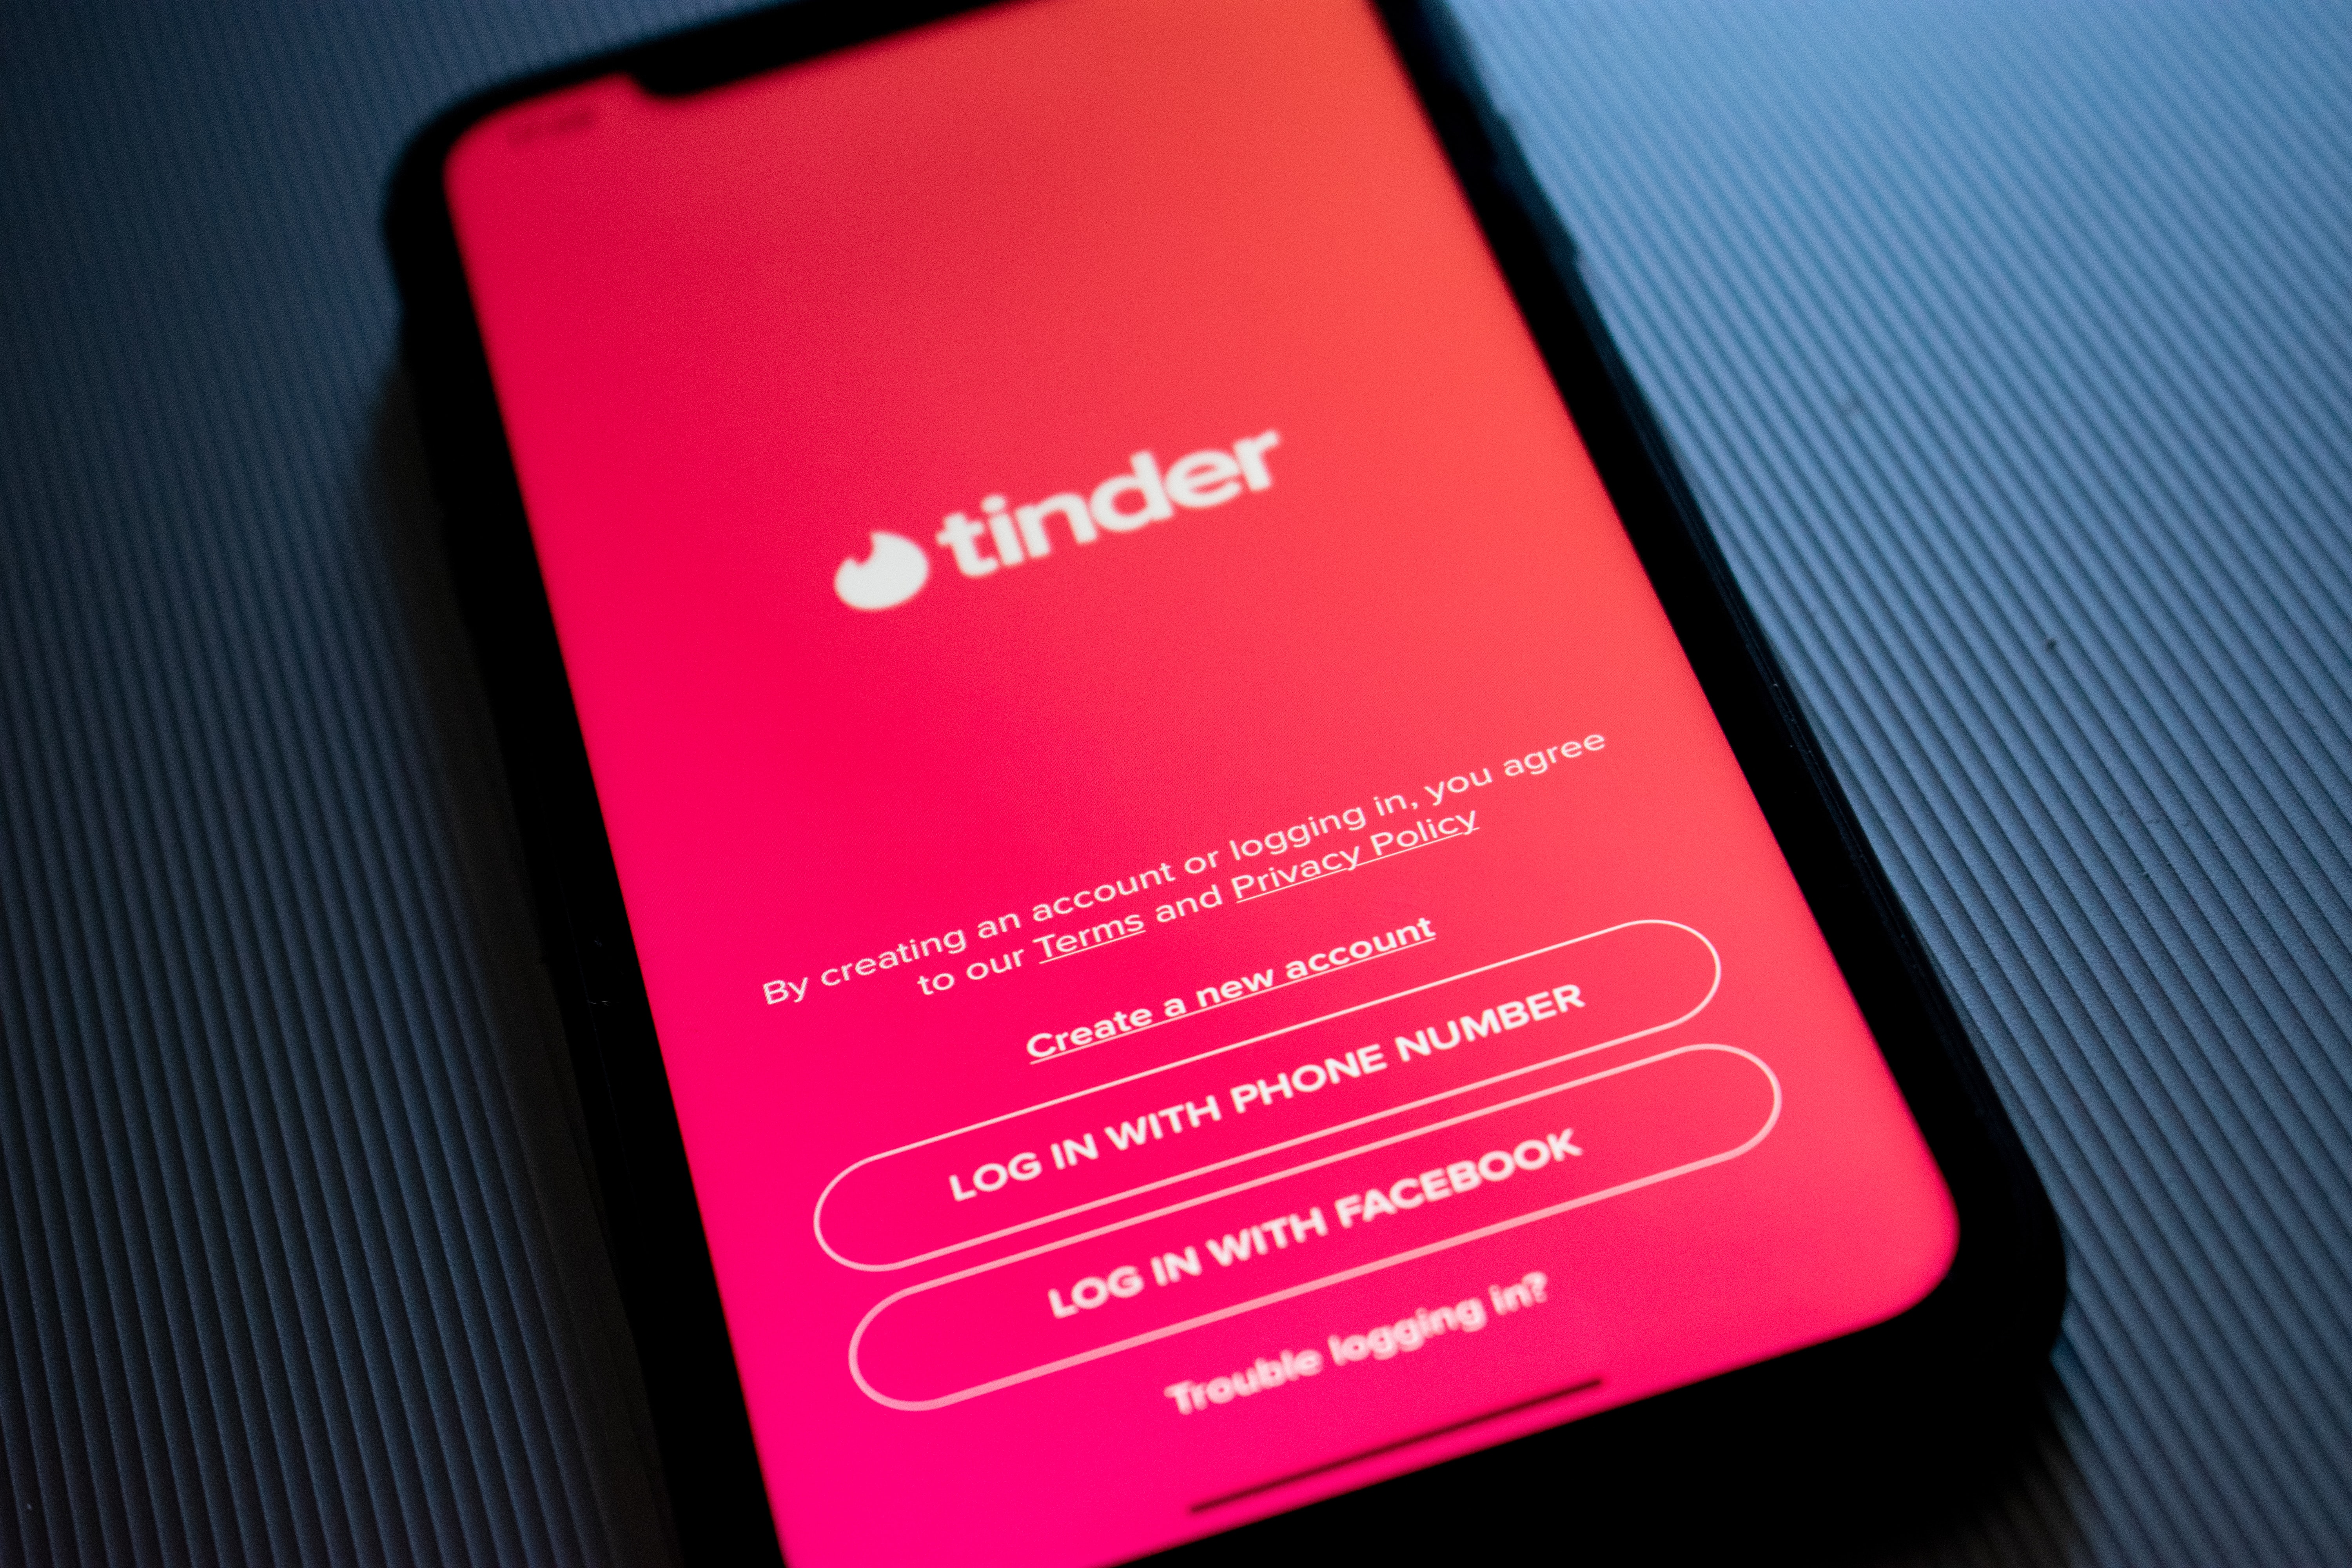 Tinder launches Tinder Plus with age-based fees